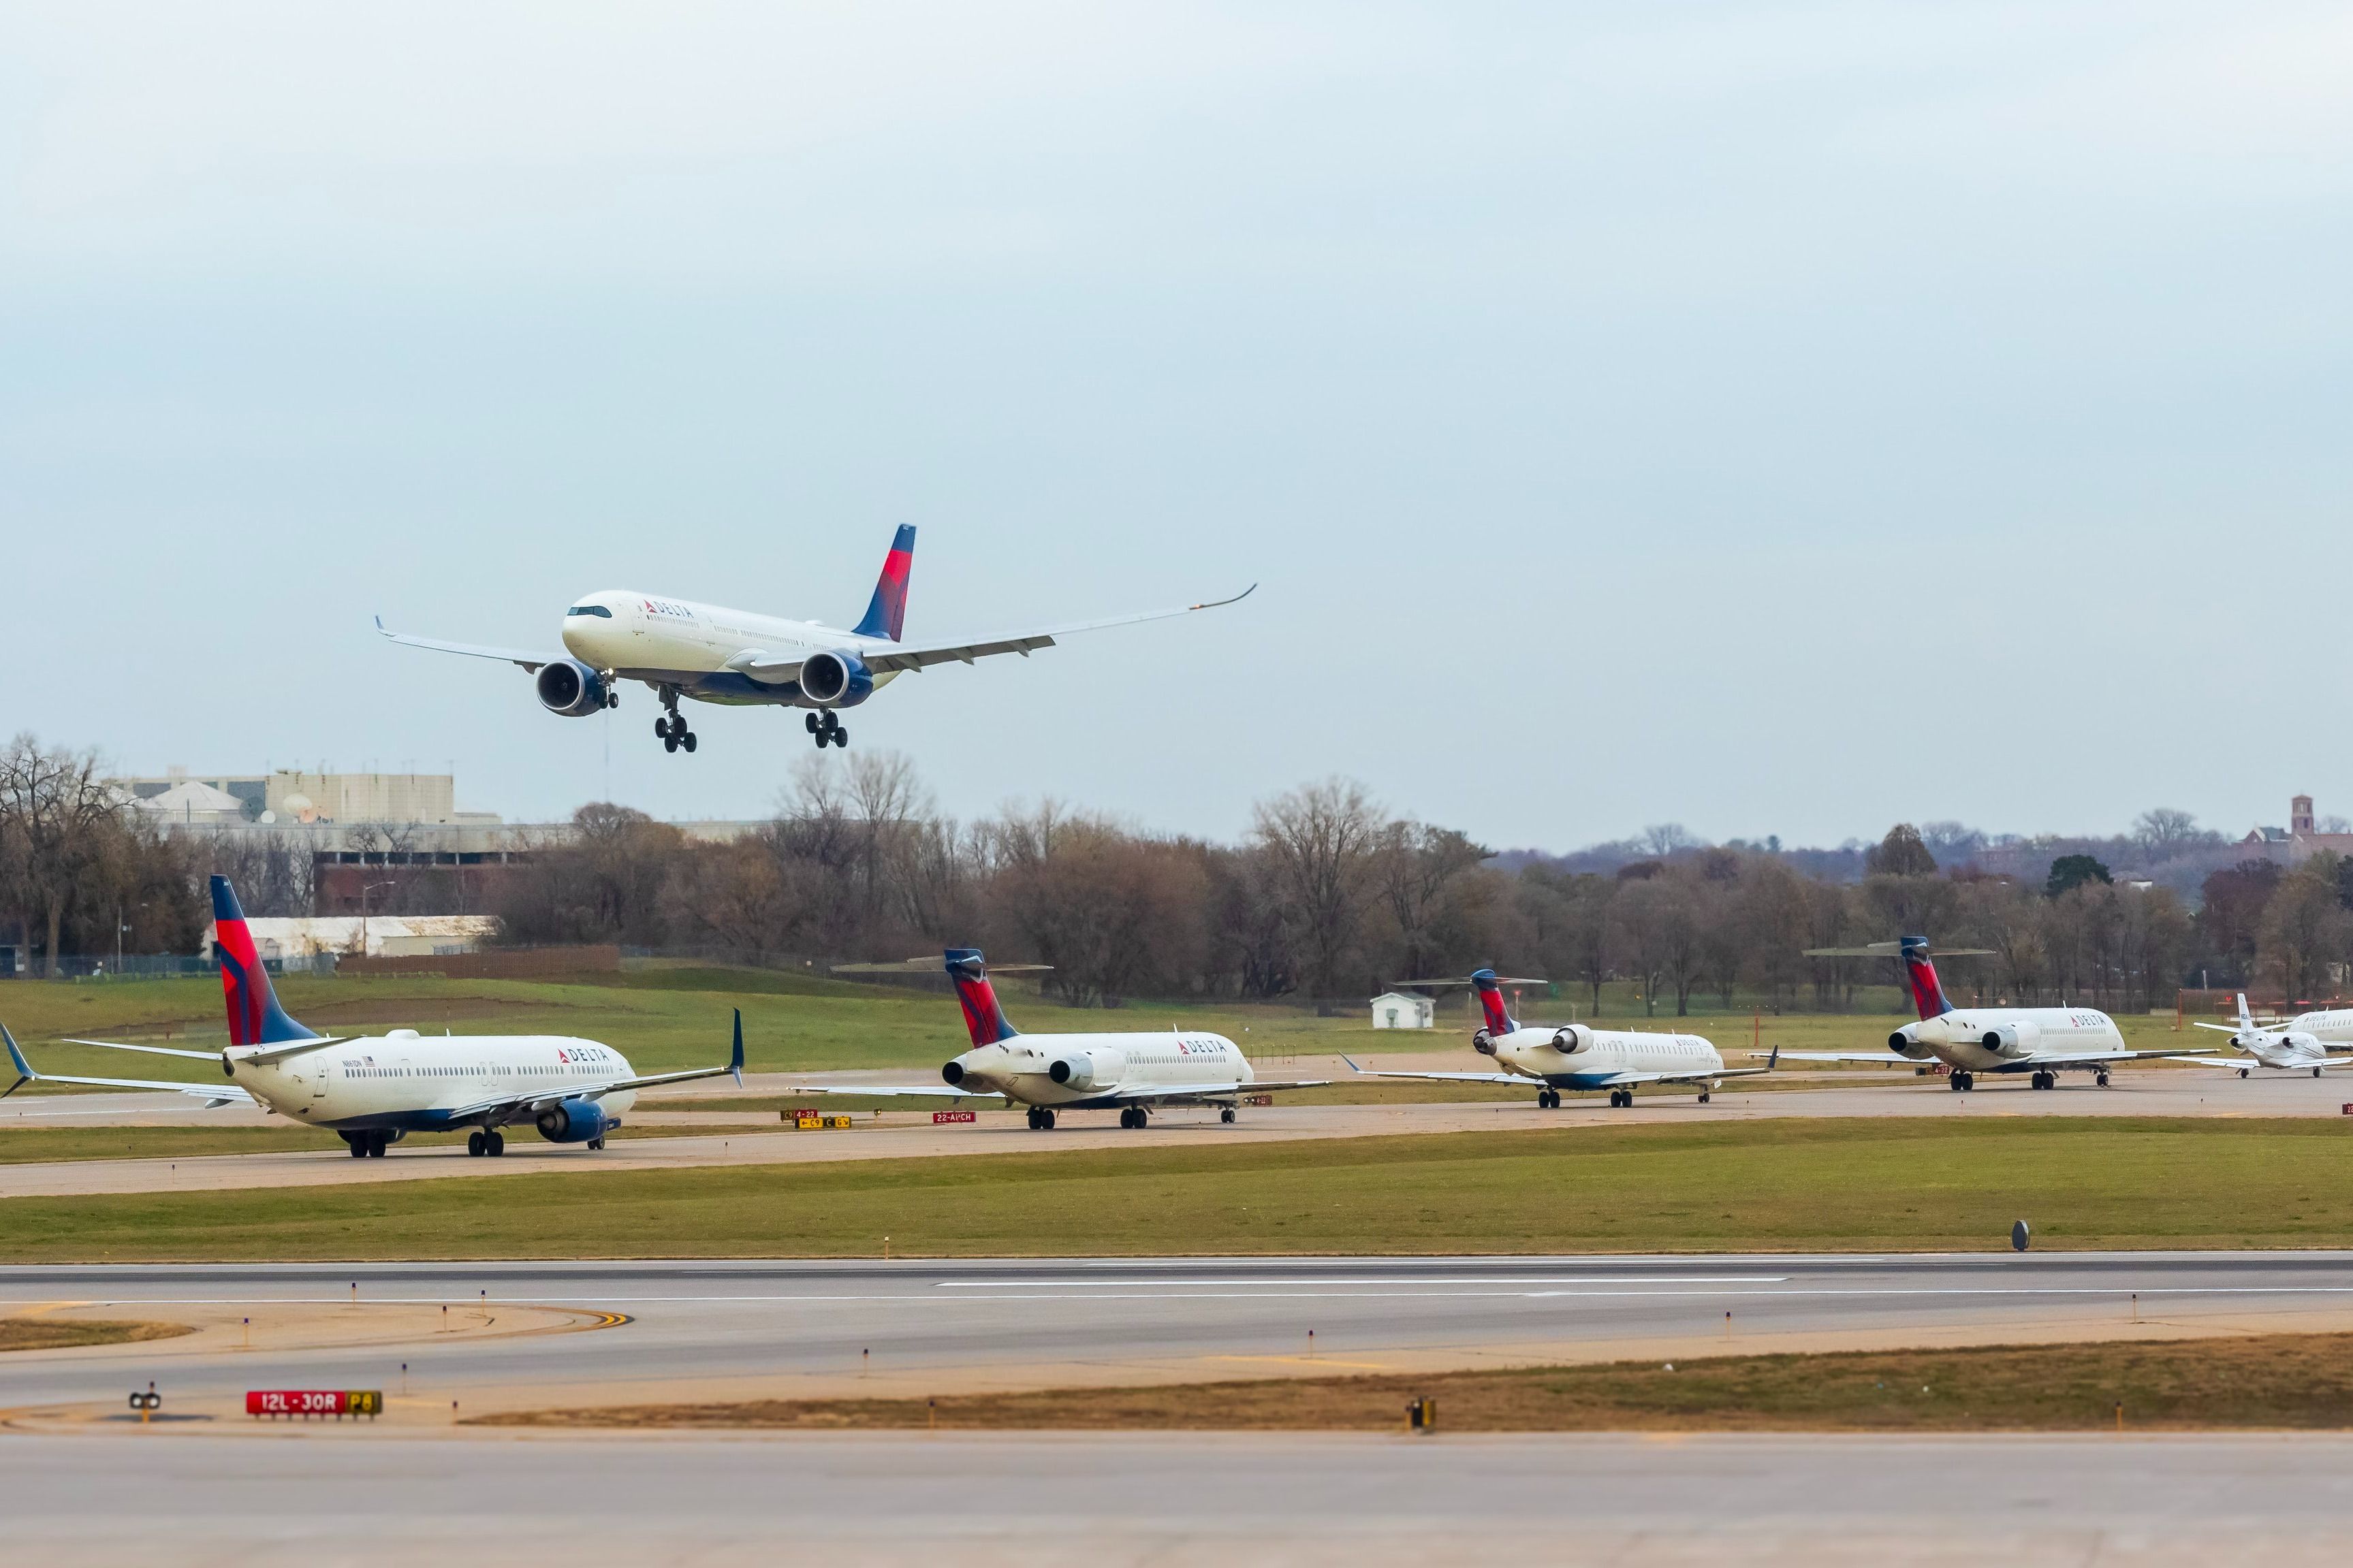 Delta Air Lines Planes lined up at Minneapolis–Saint Paul International Airport.